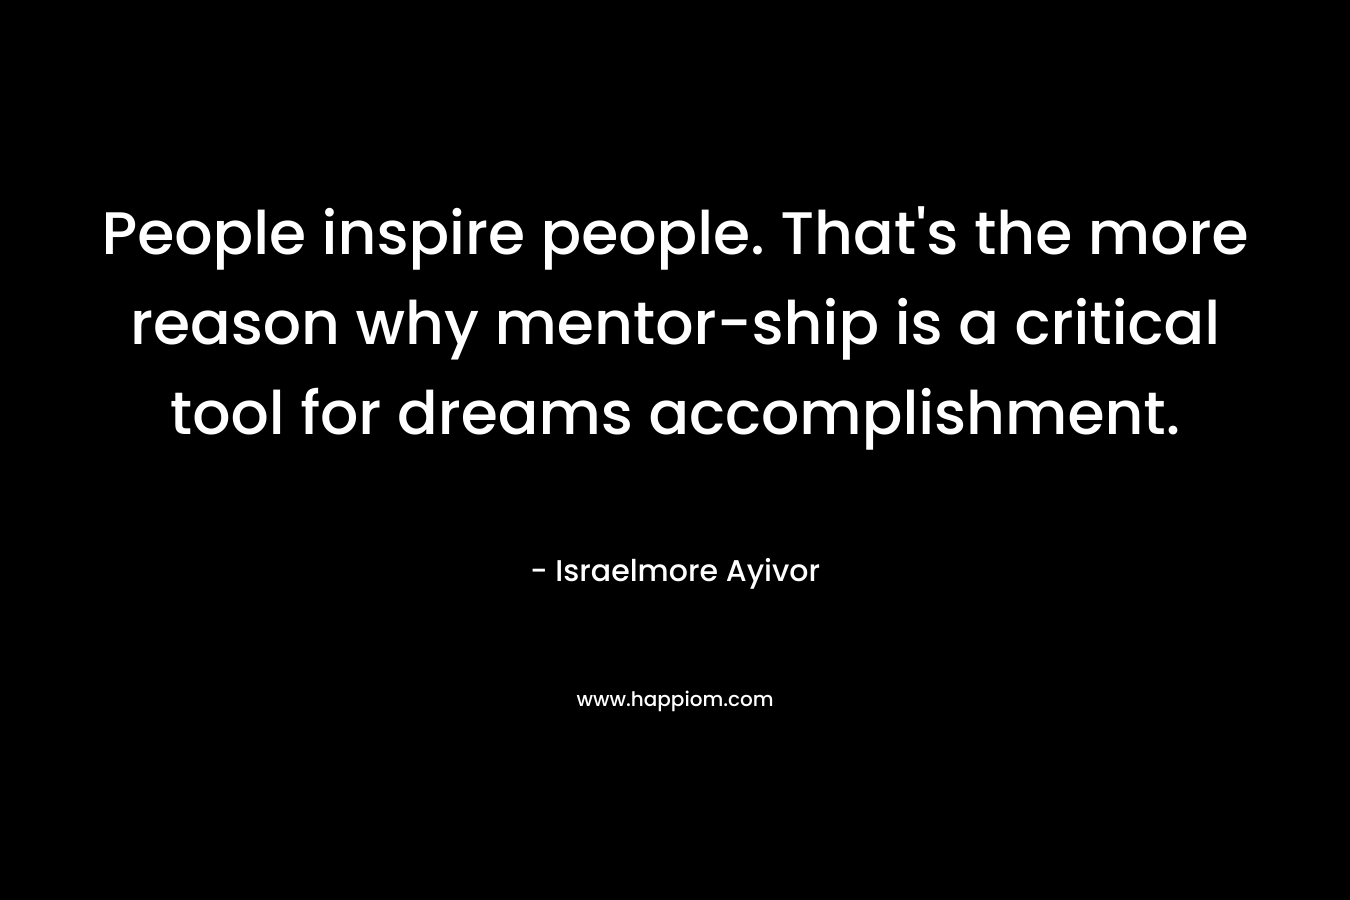 People inspire people. That's the more reason why mentor-ship is a critical tool for dreams accomplishment.